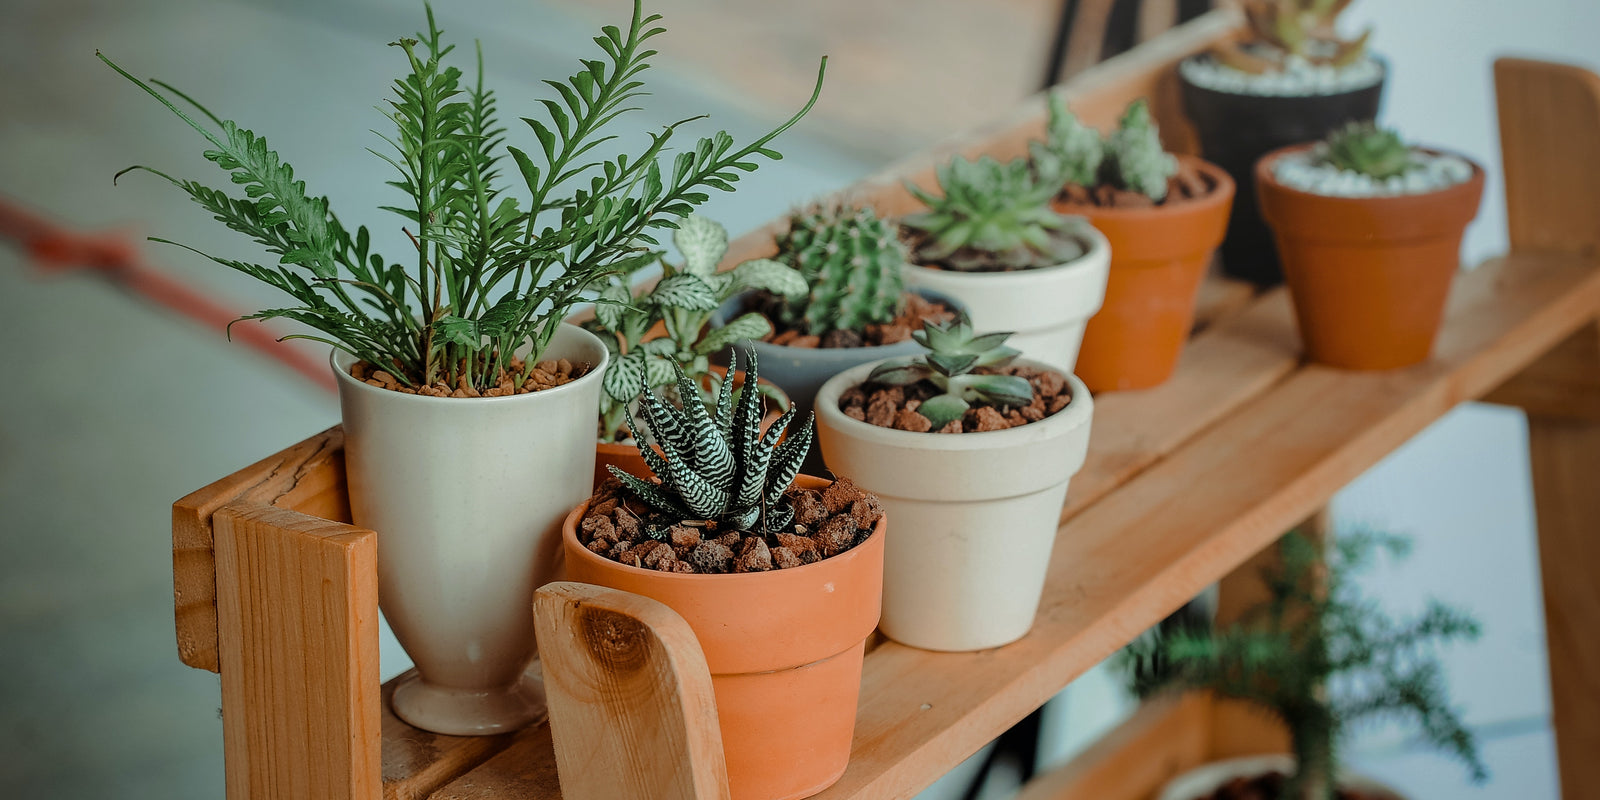 Tips On How To Grow Plants At Home Without Having A Green Thumb